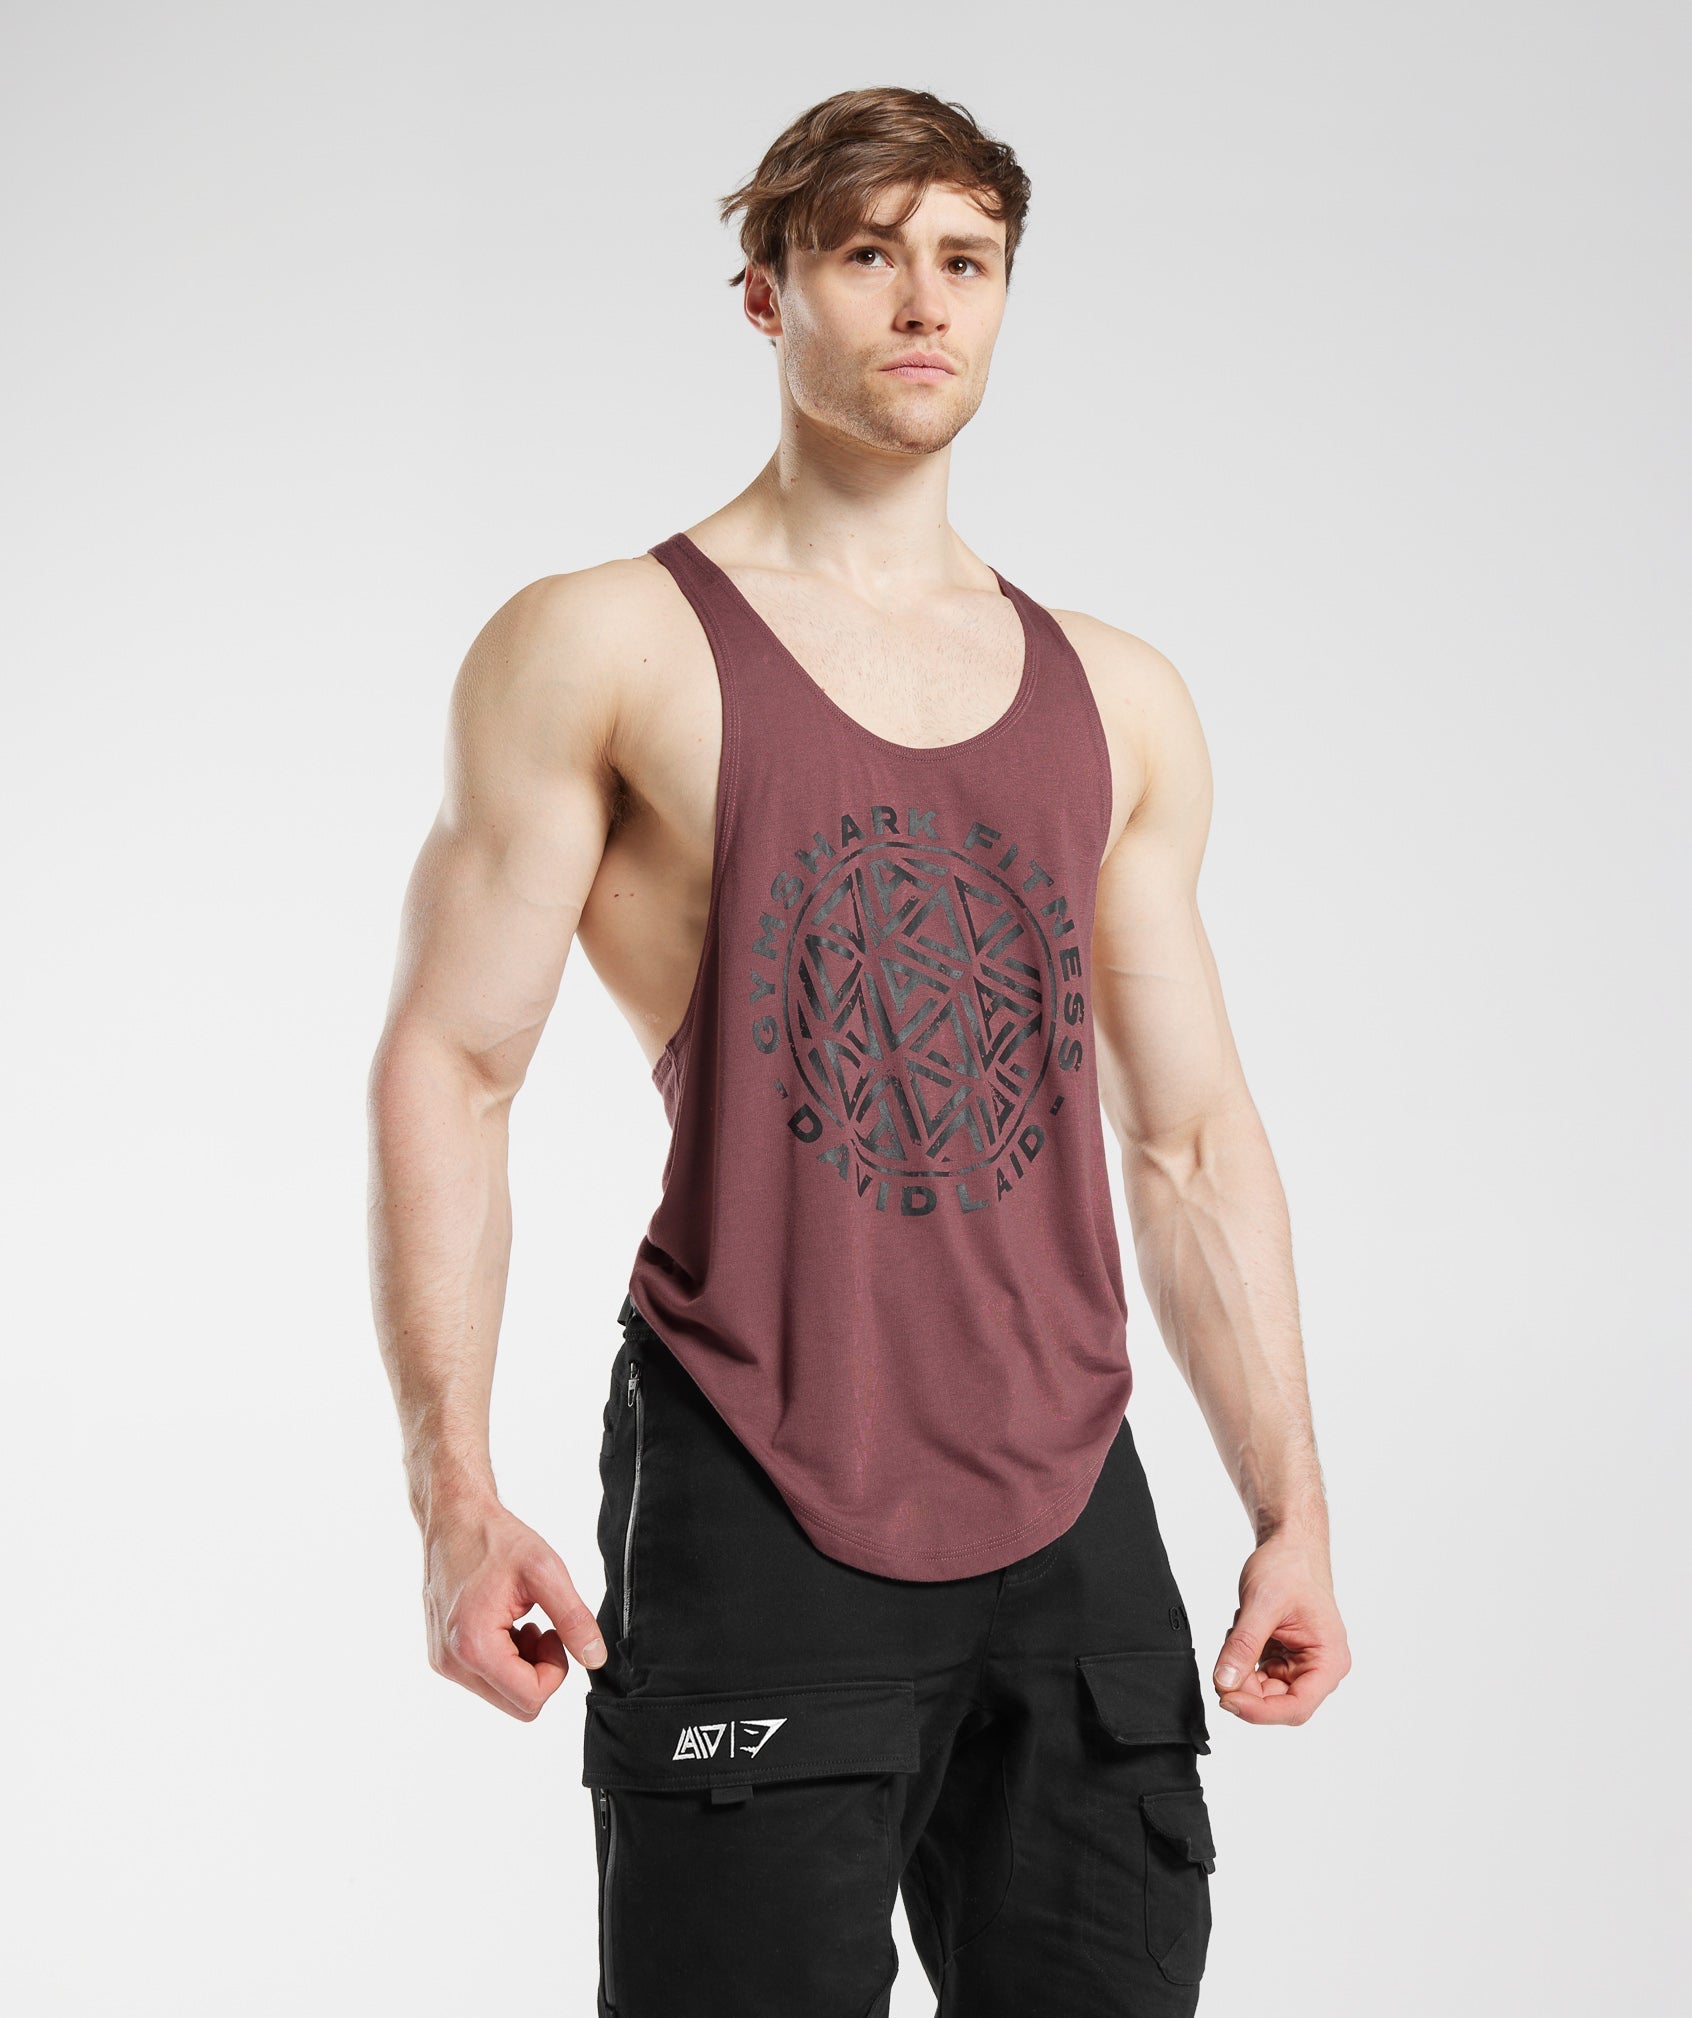 Men's Lift Apparel, Weightlifting Clothing